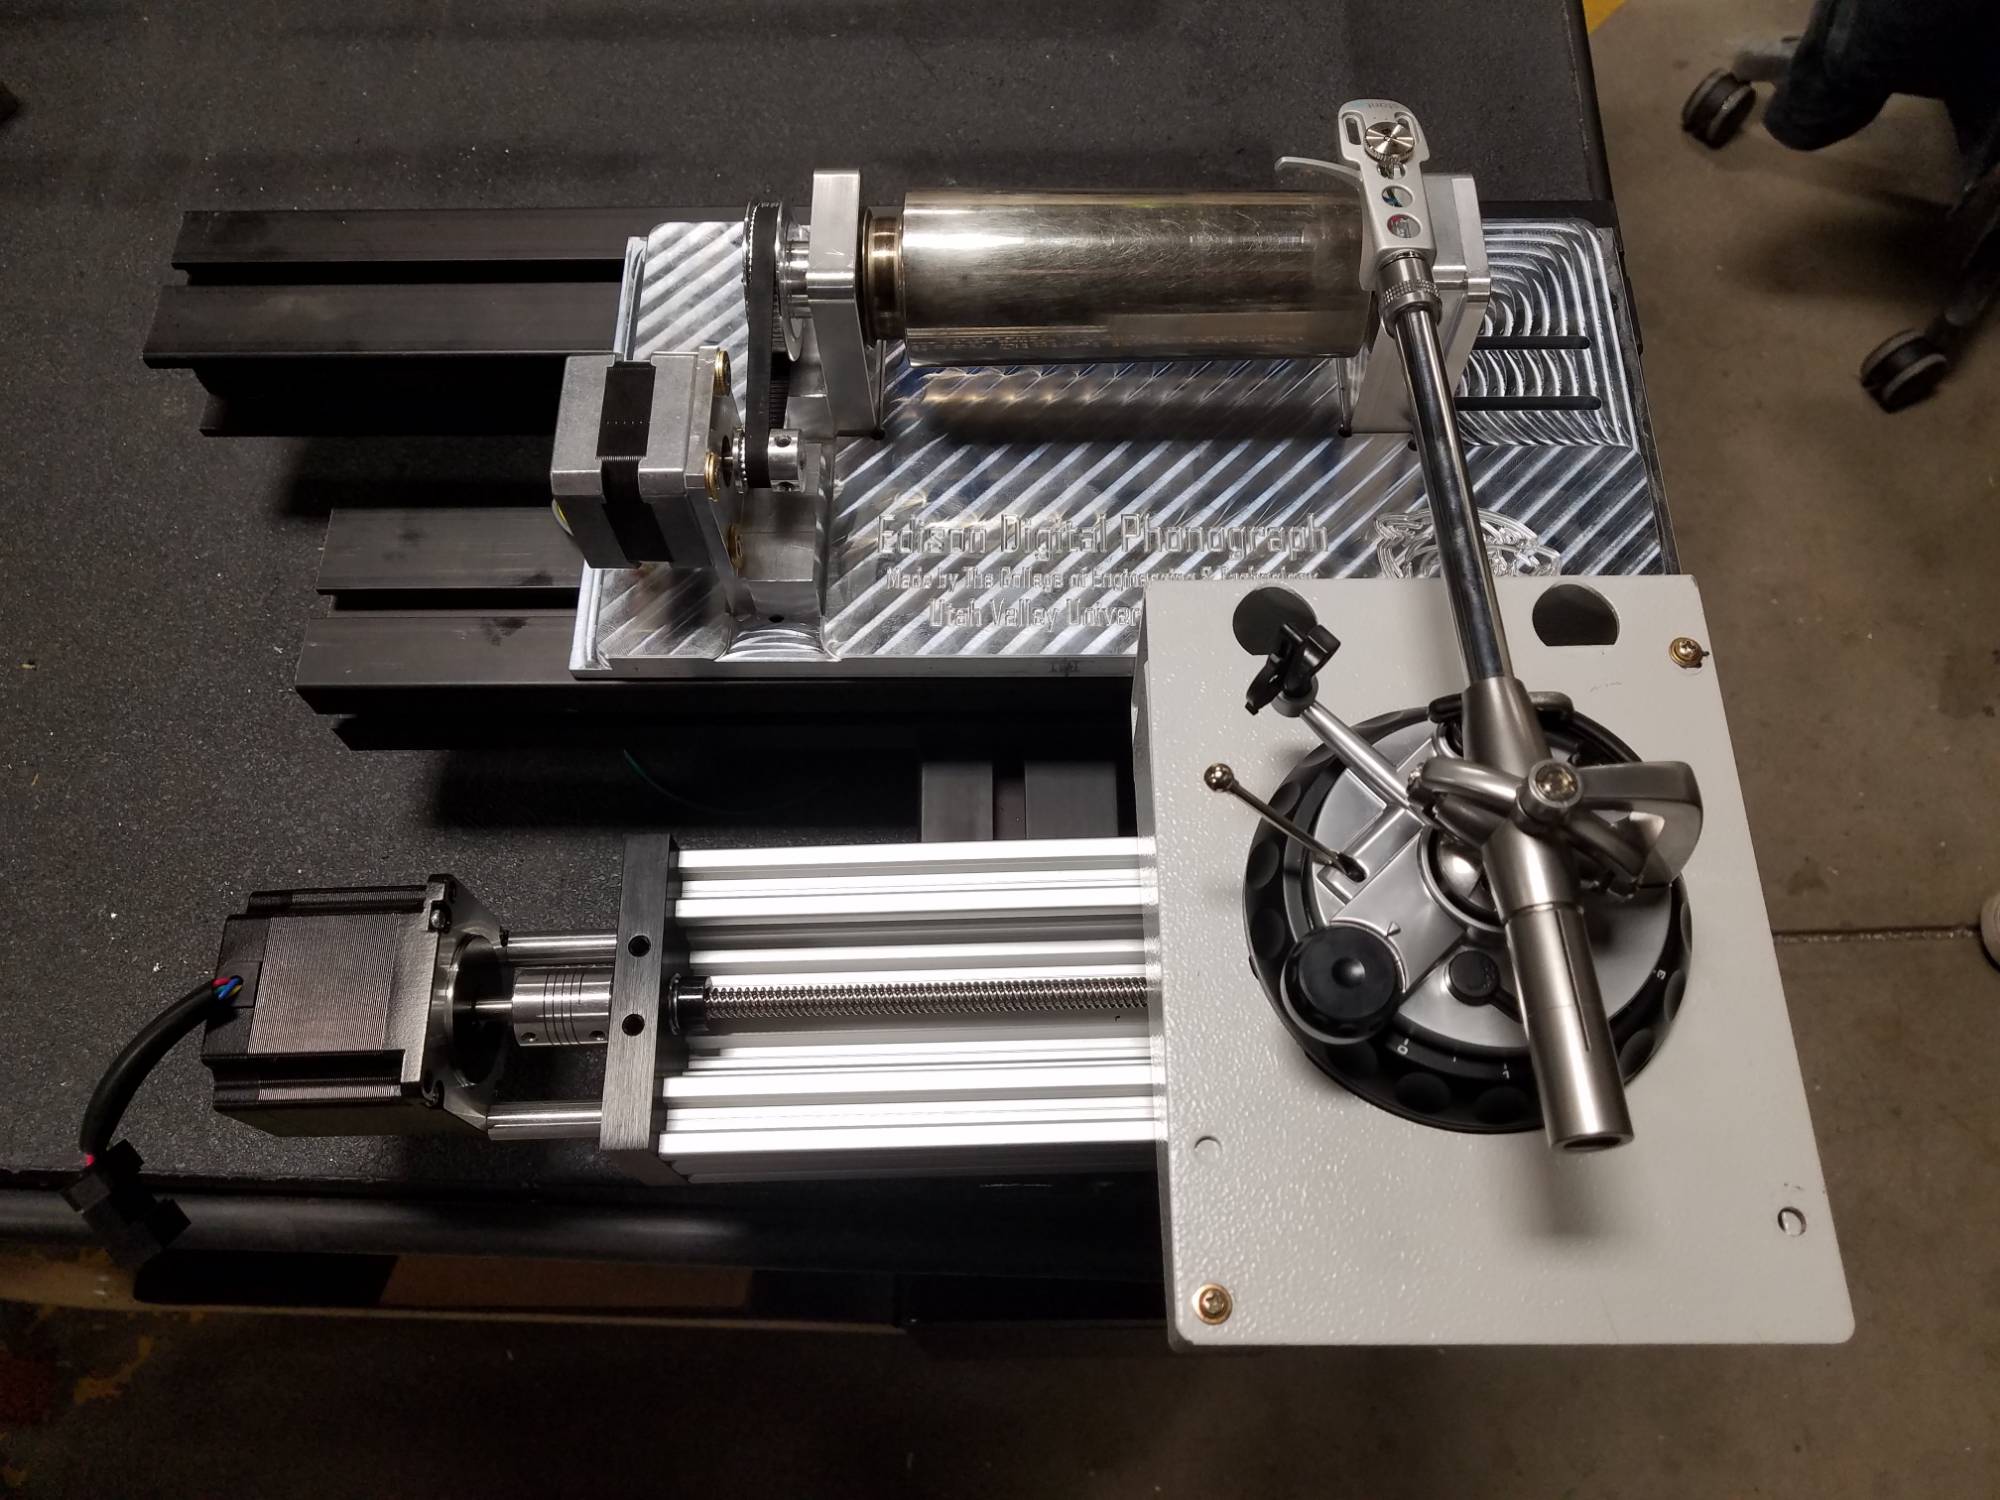 A machined tool